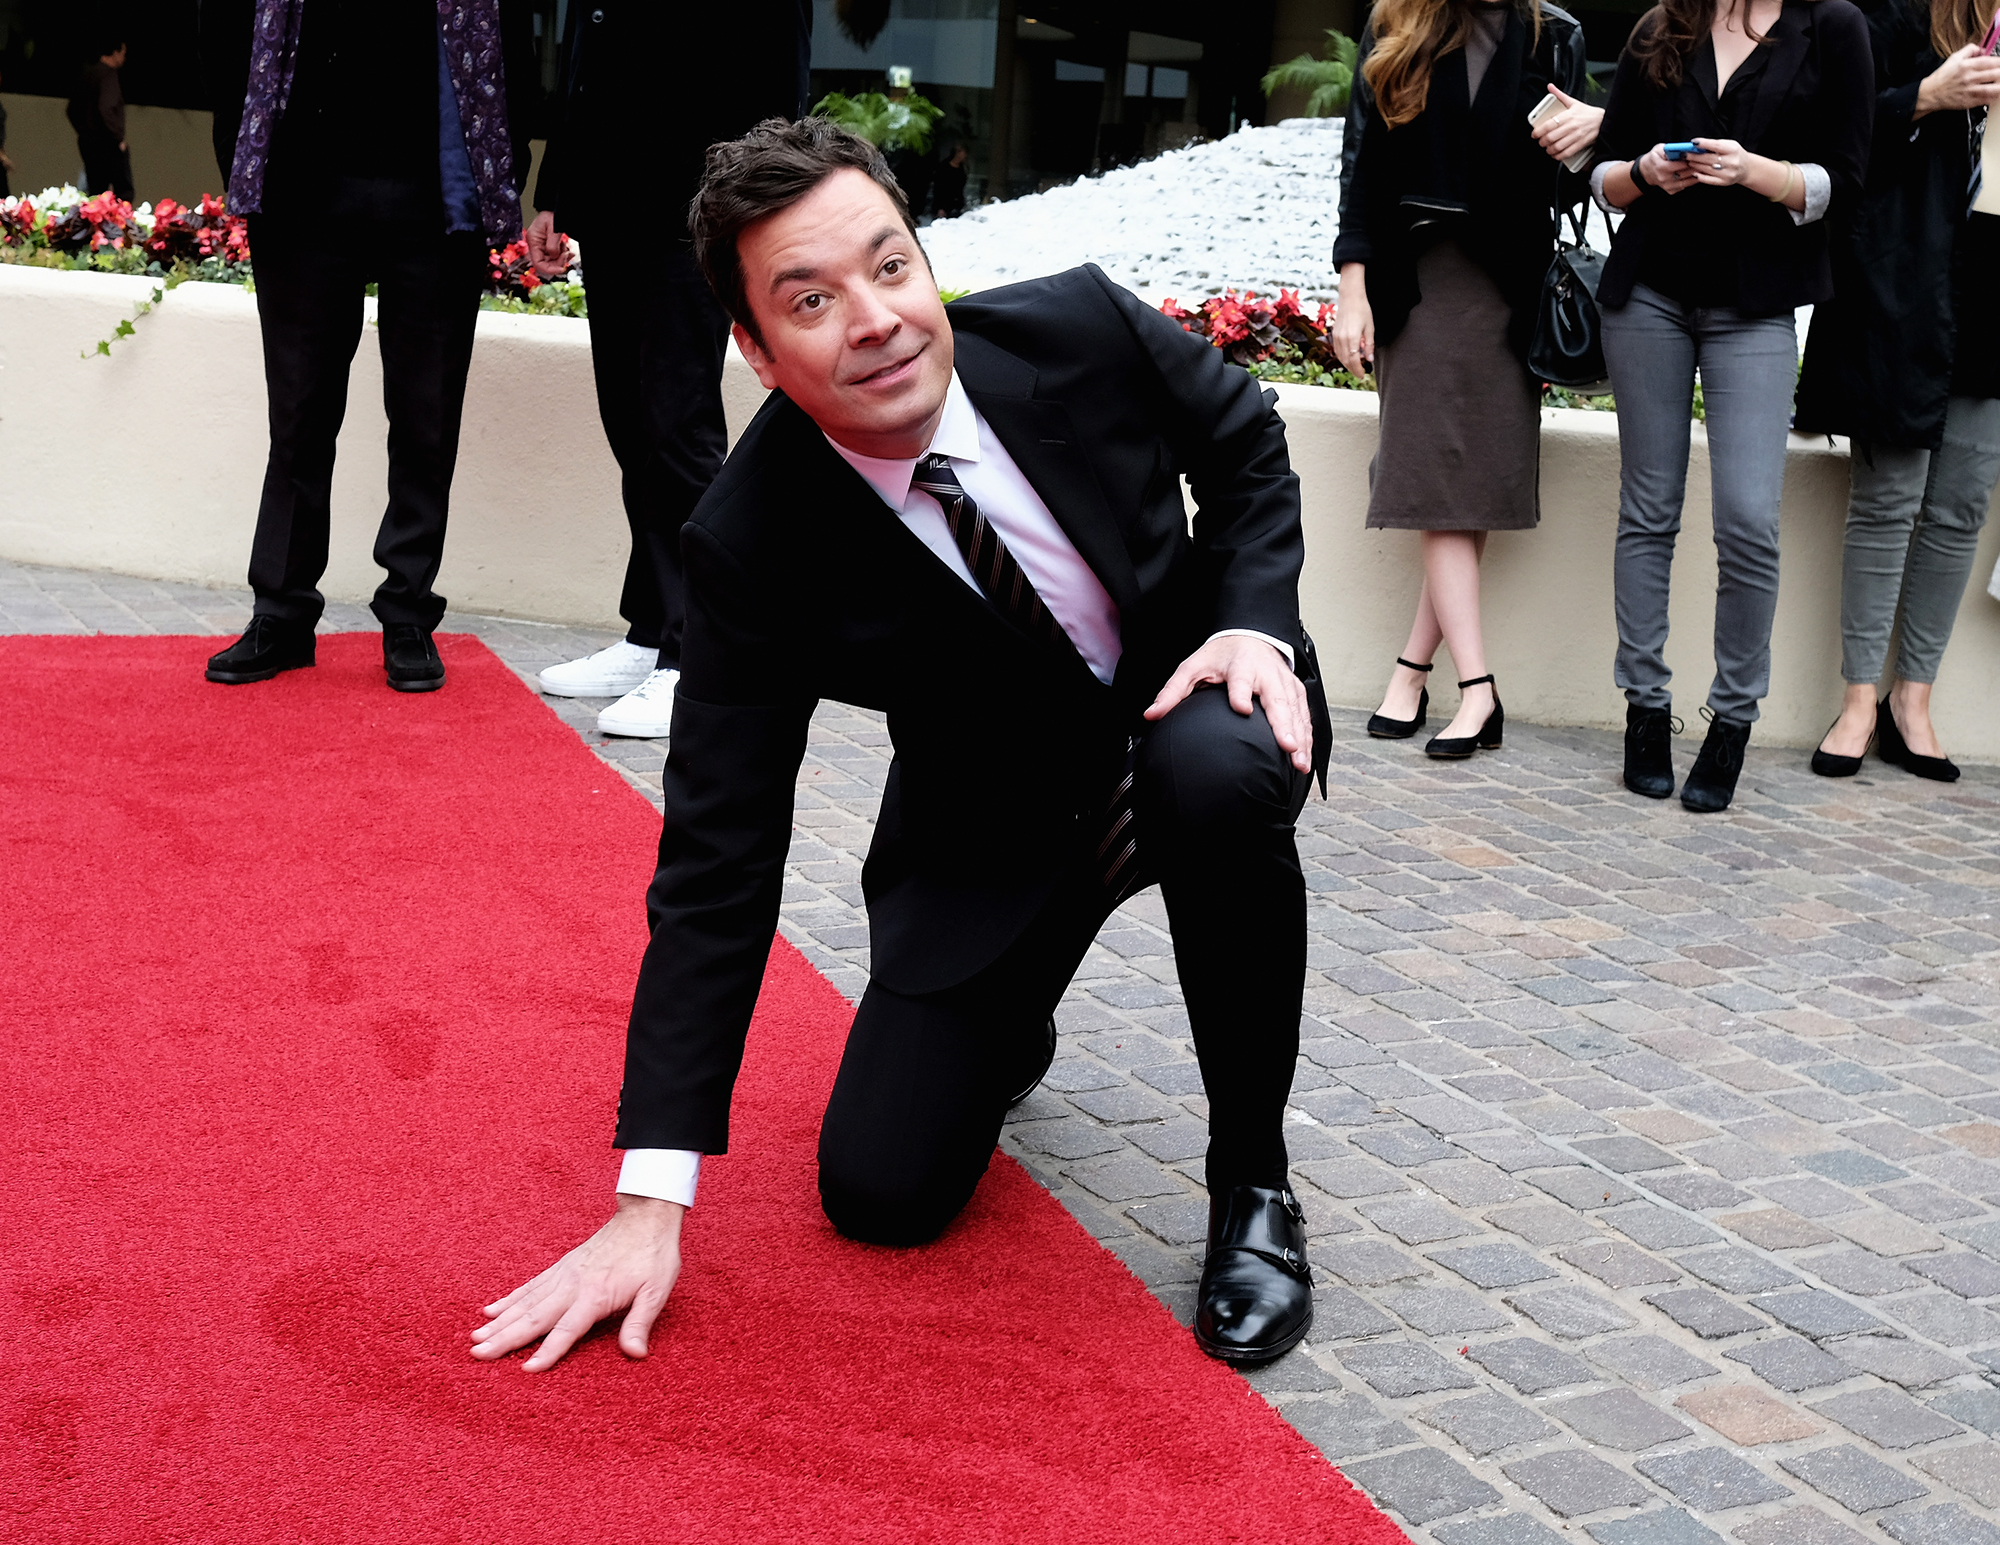 Jimmy Fallon attends the 74th Annual Golden Globes Preview Day at The Beverly Hilton Hotel on Jan. 4, 2017 in Beverly Hills, Calif. (Alberto E. Rodriguez—Getty Images)